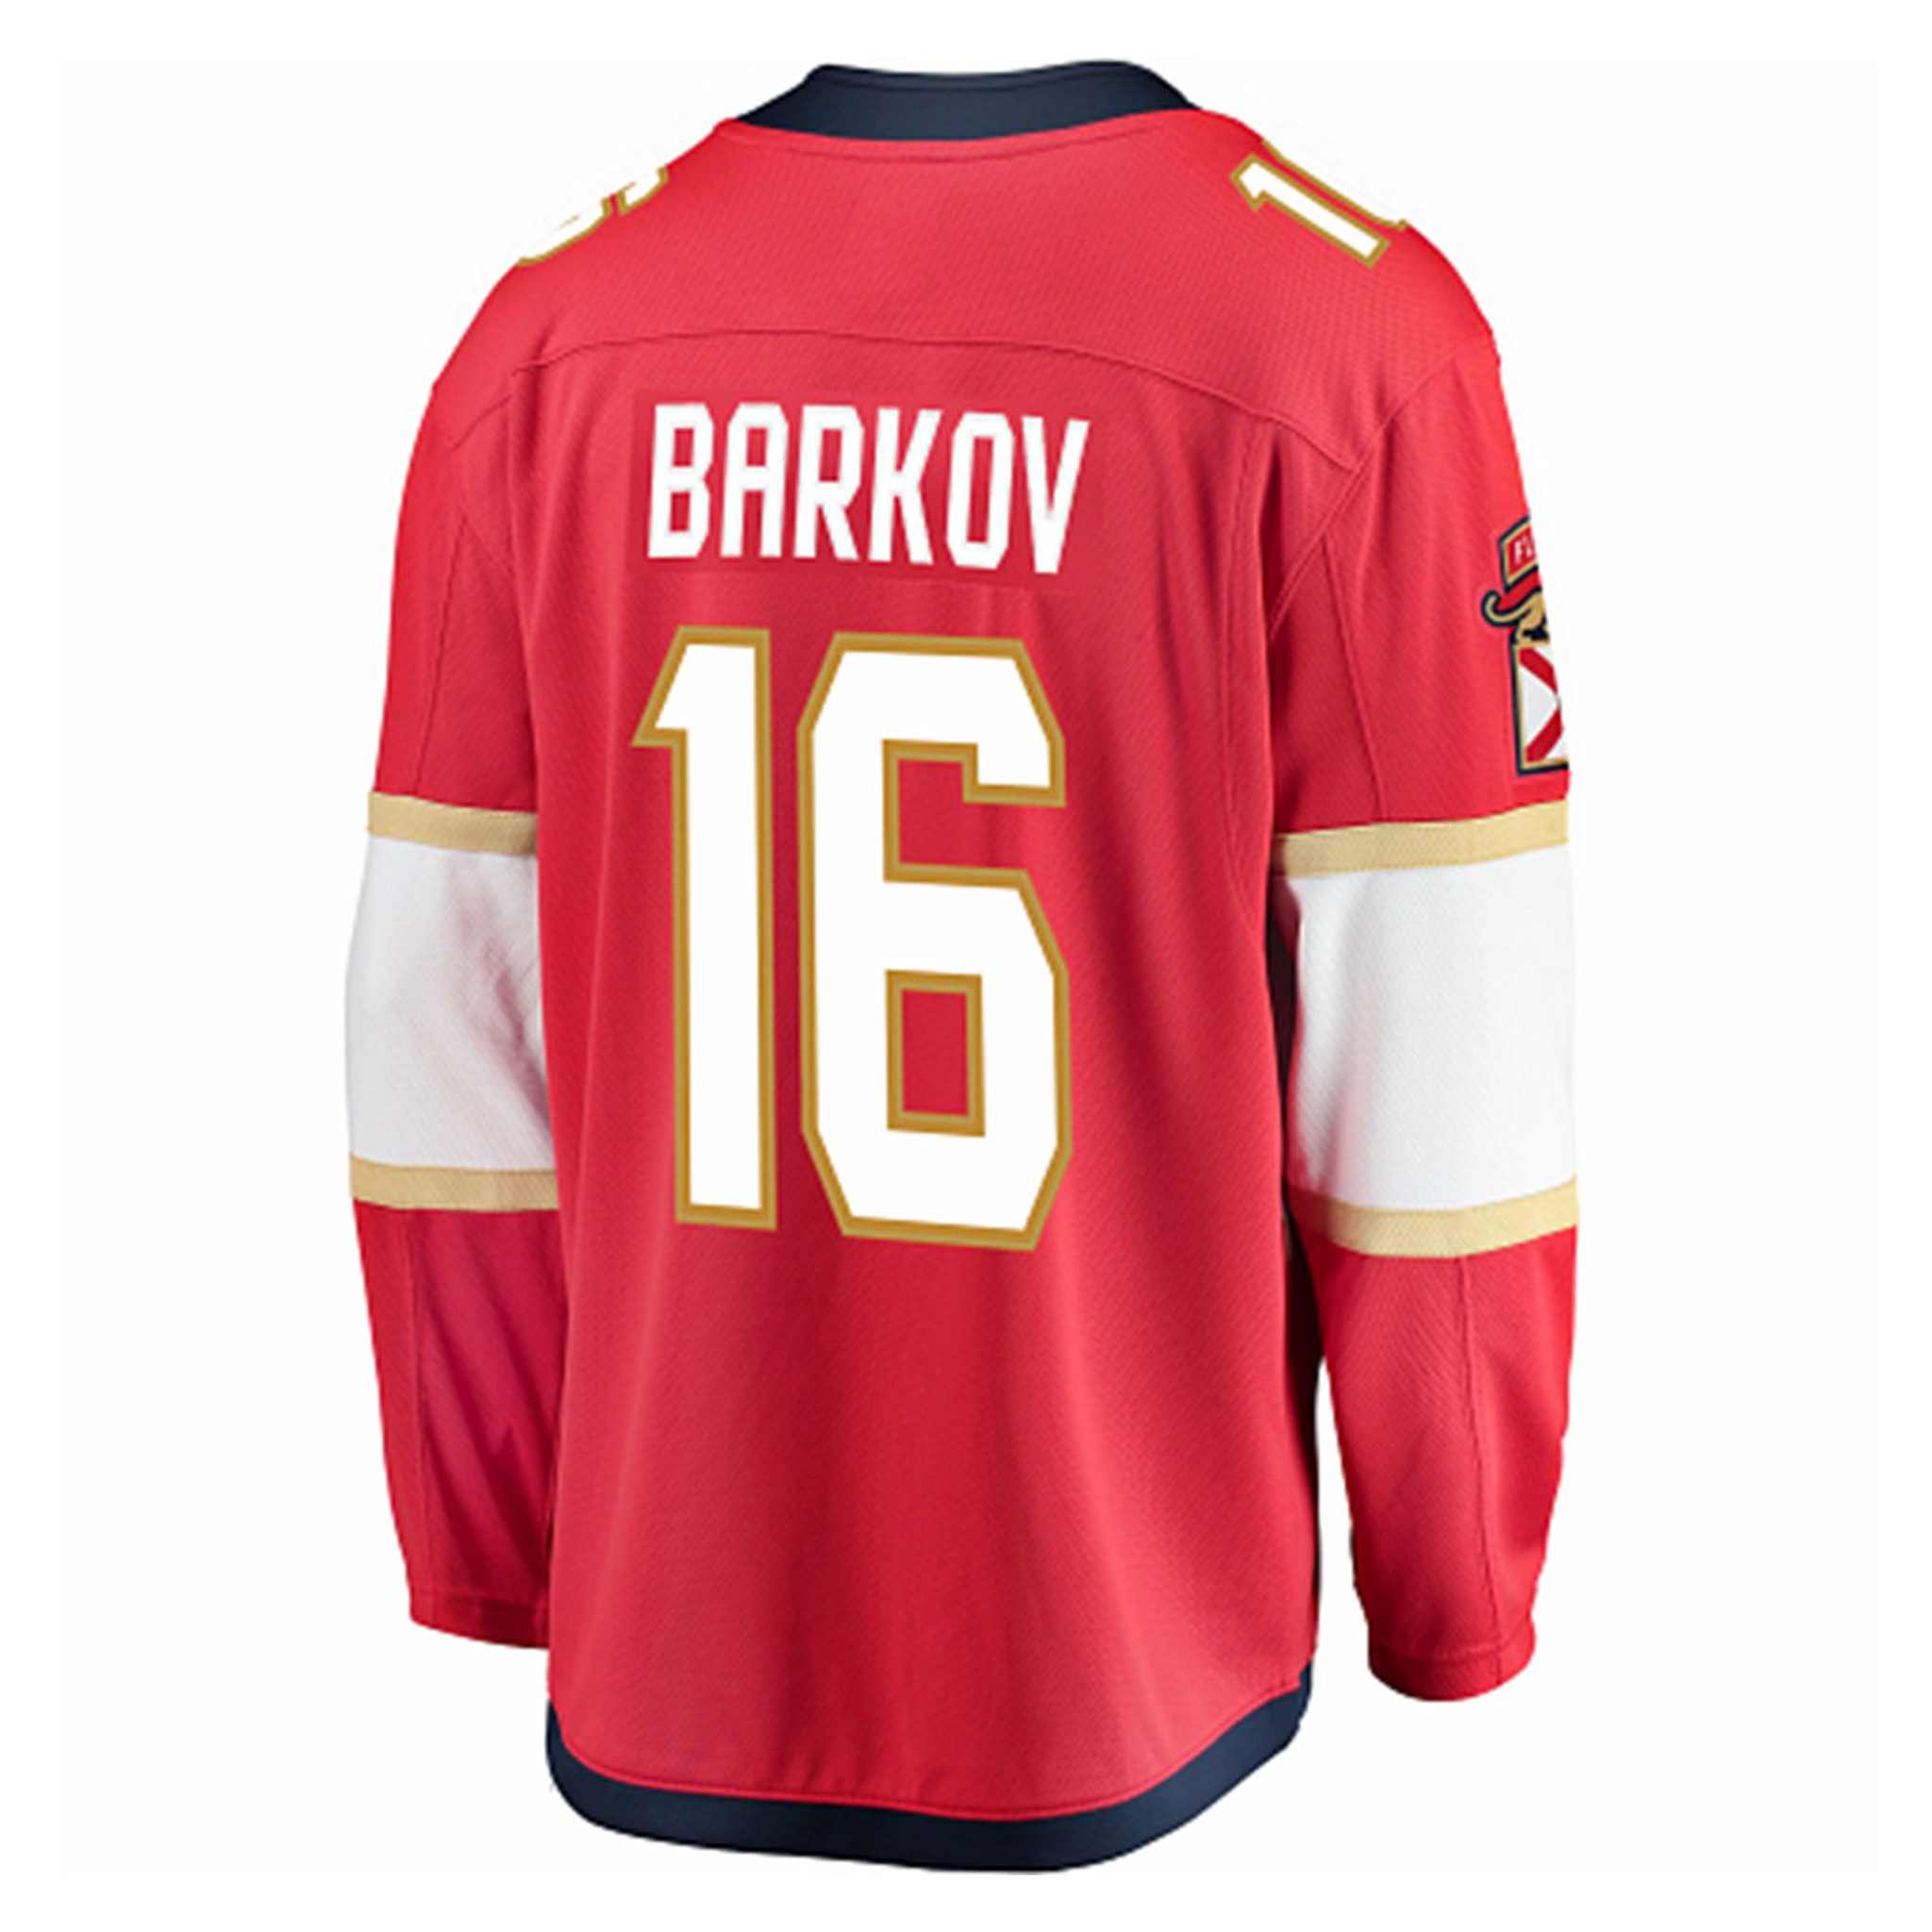 Aleksander Barkov was named as captain of the Florida Panthers on